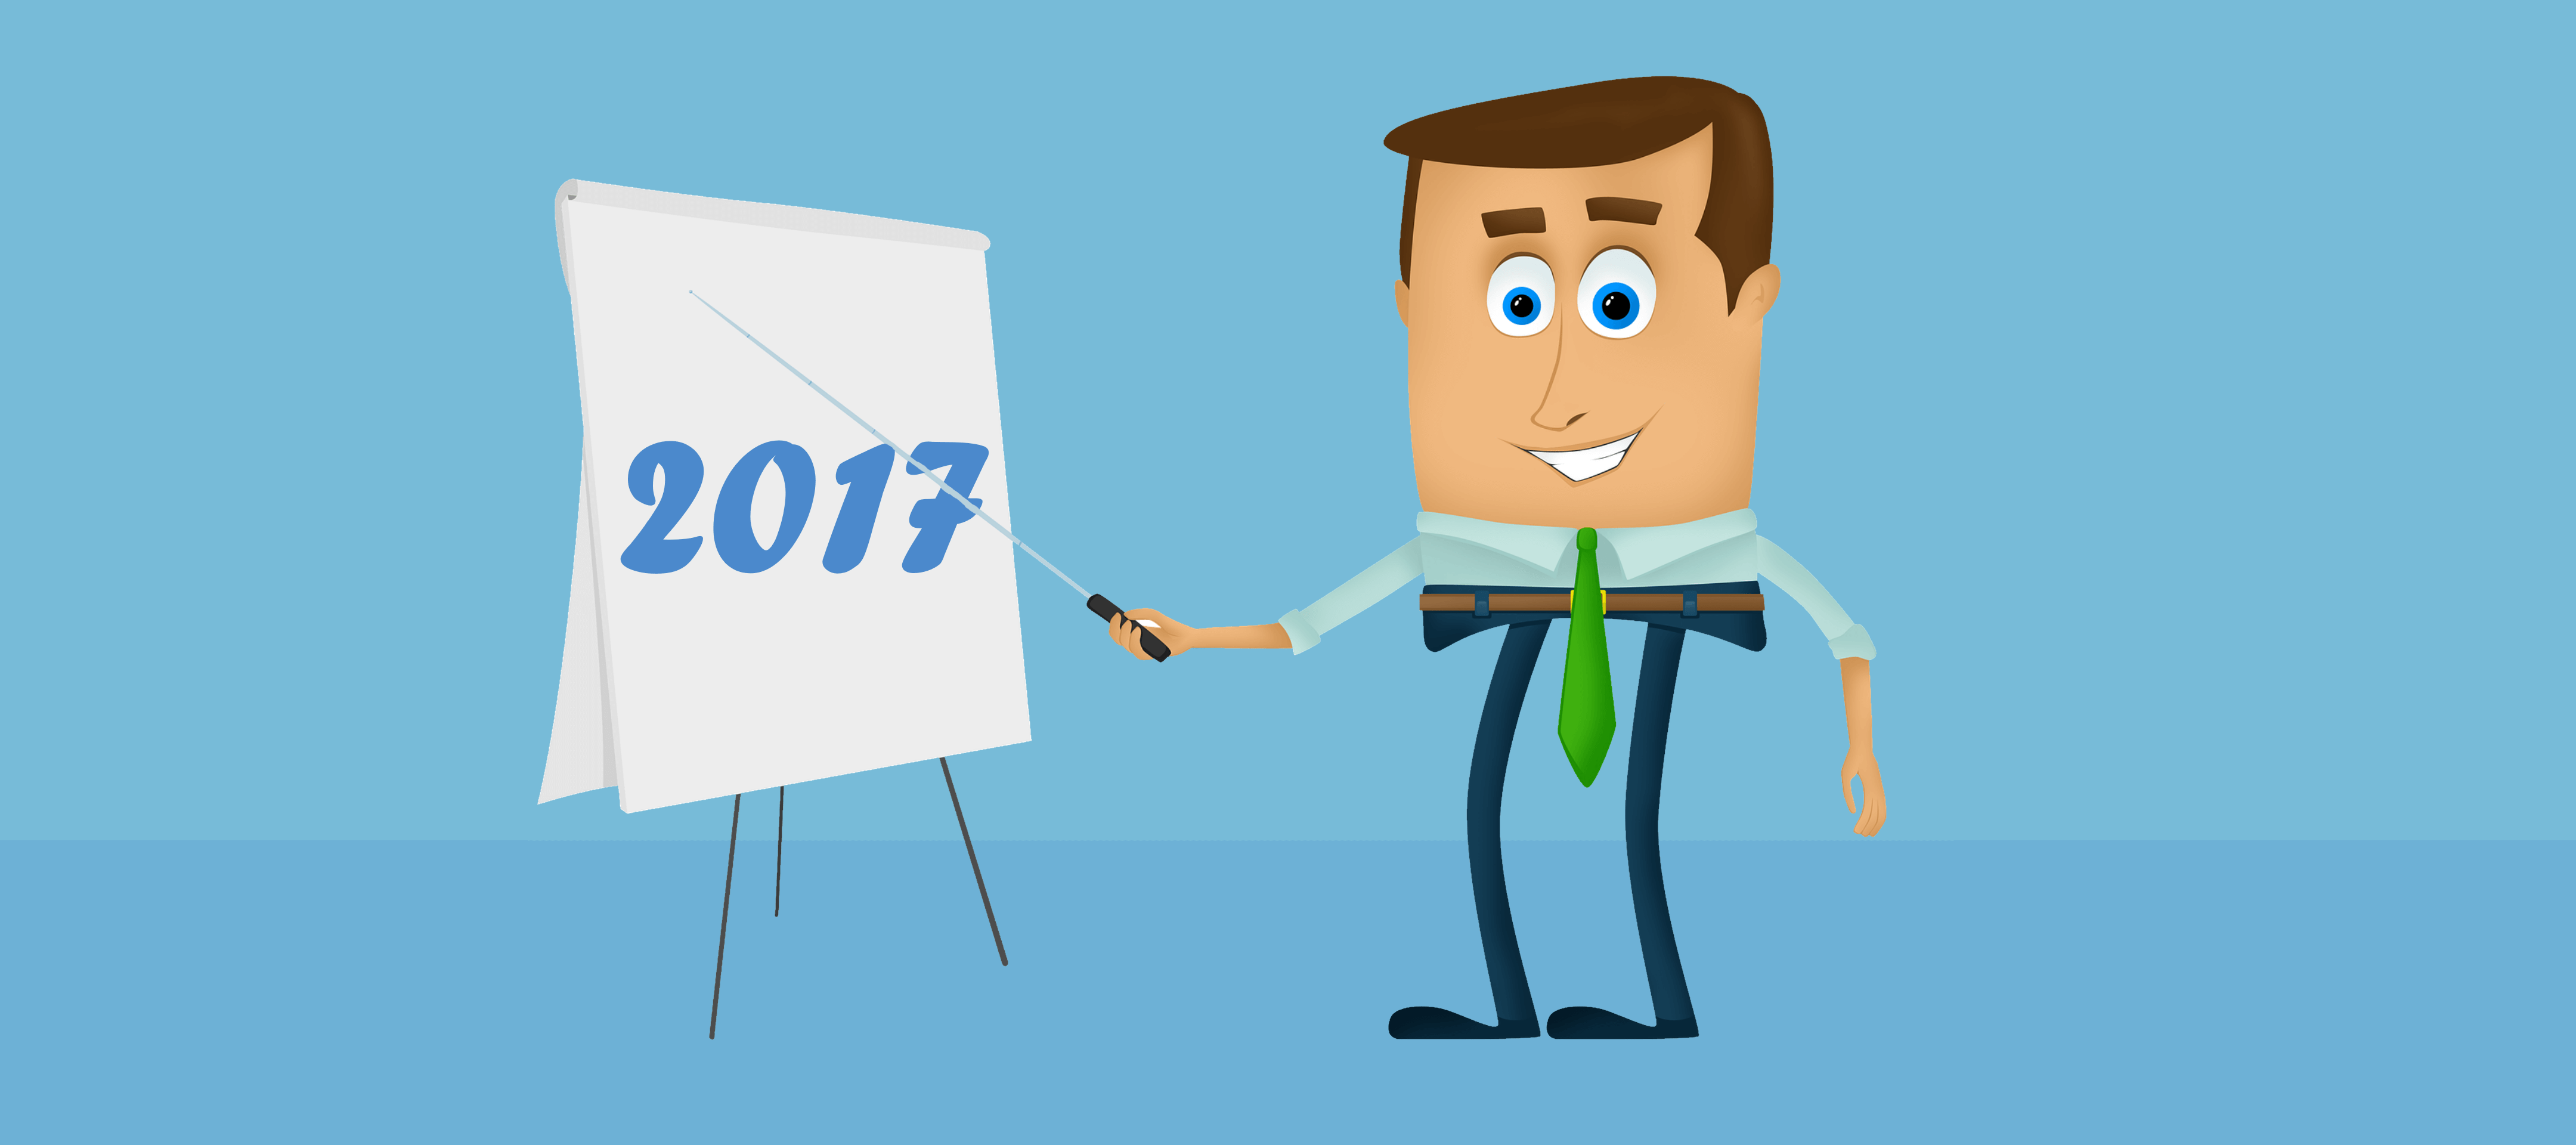 A doodle of an enthusiastic leader pointing at a board that says 2017